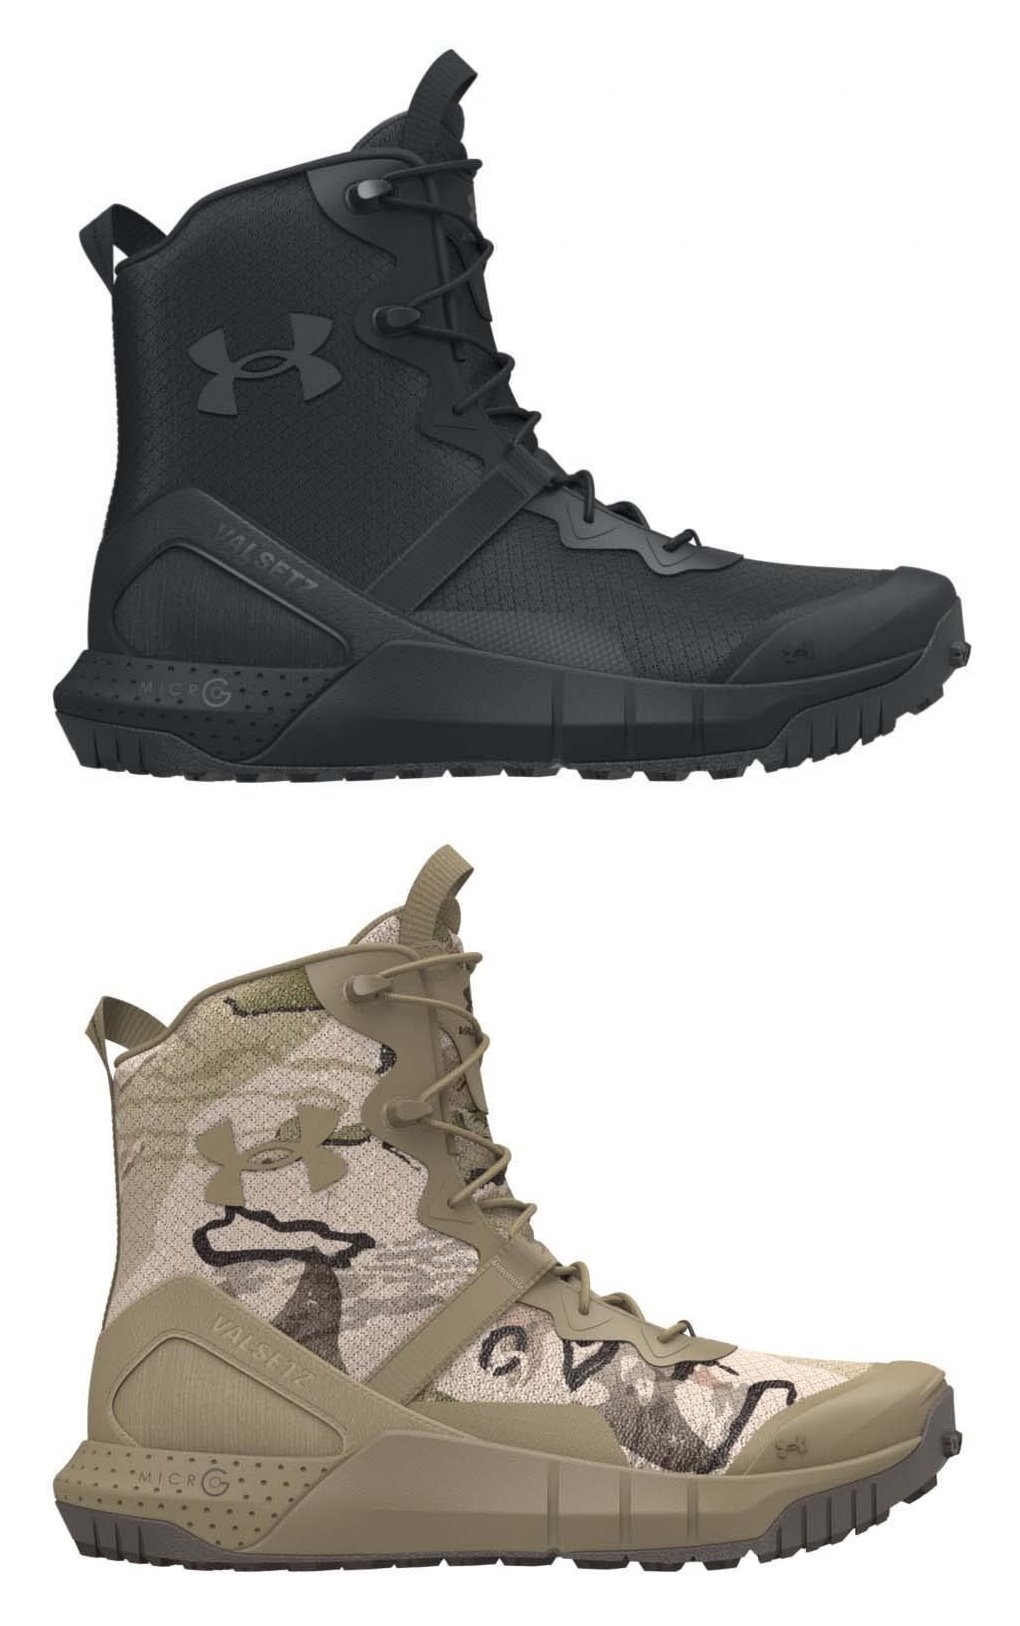  Under Armour Mens Micro G Valsetz Mid Military And Tactical  Boot, Black